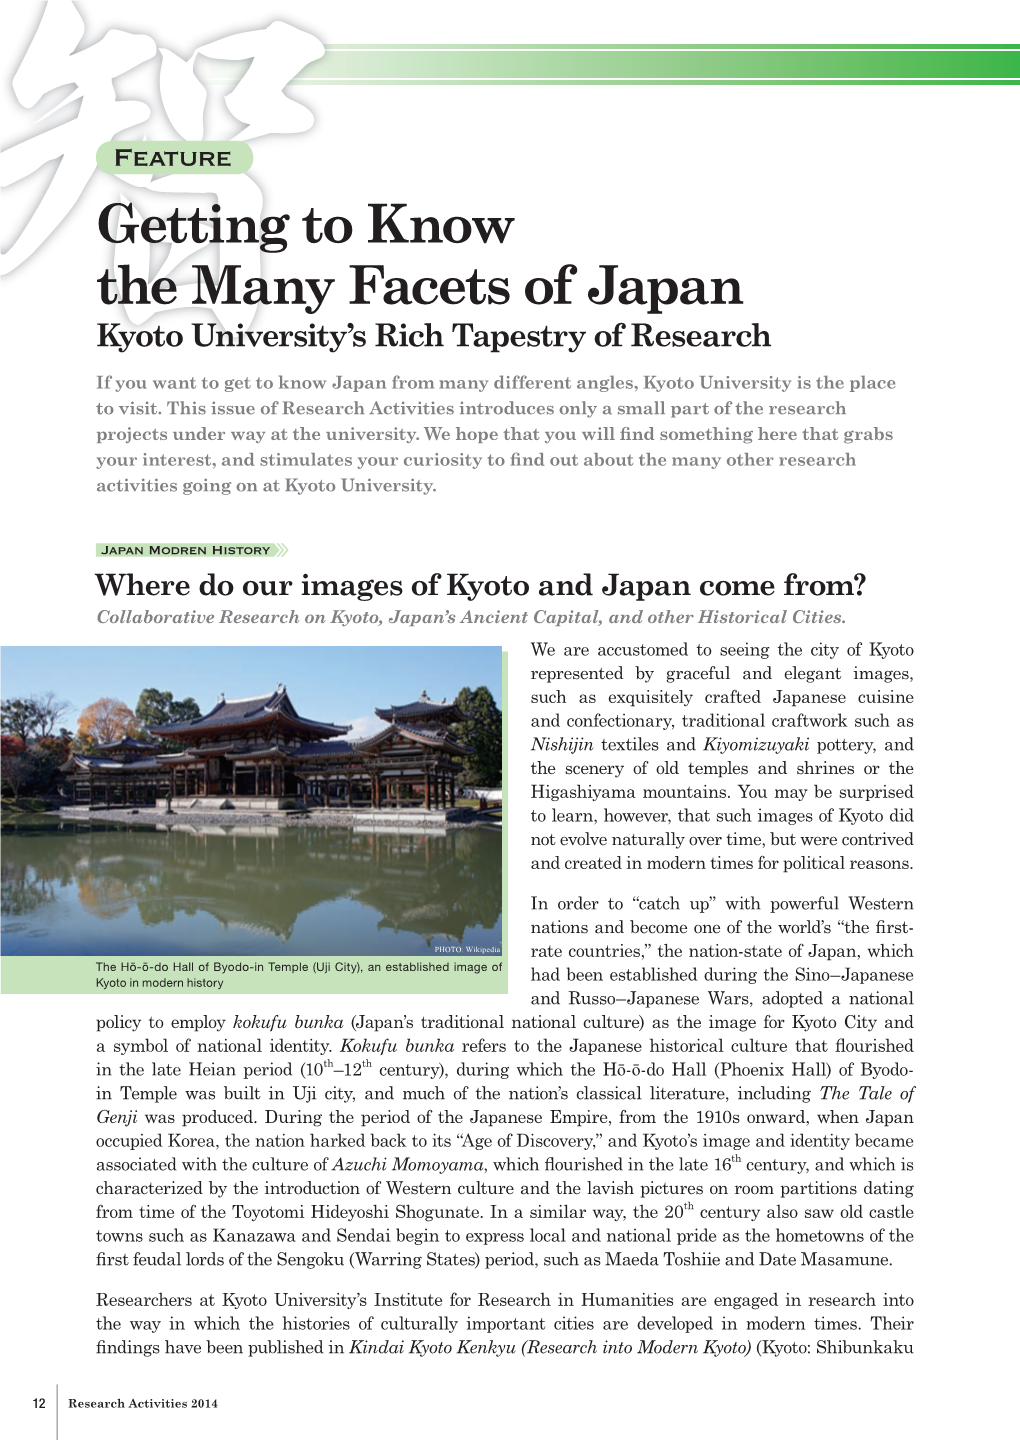 Getting to Know the Many Facets of Japan